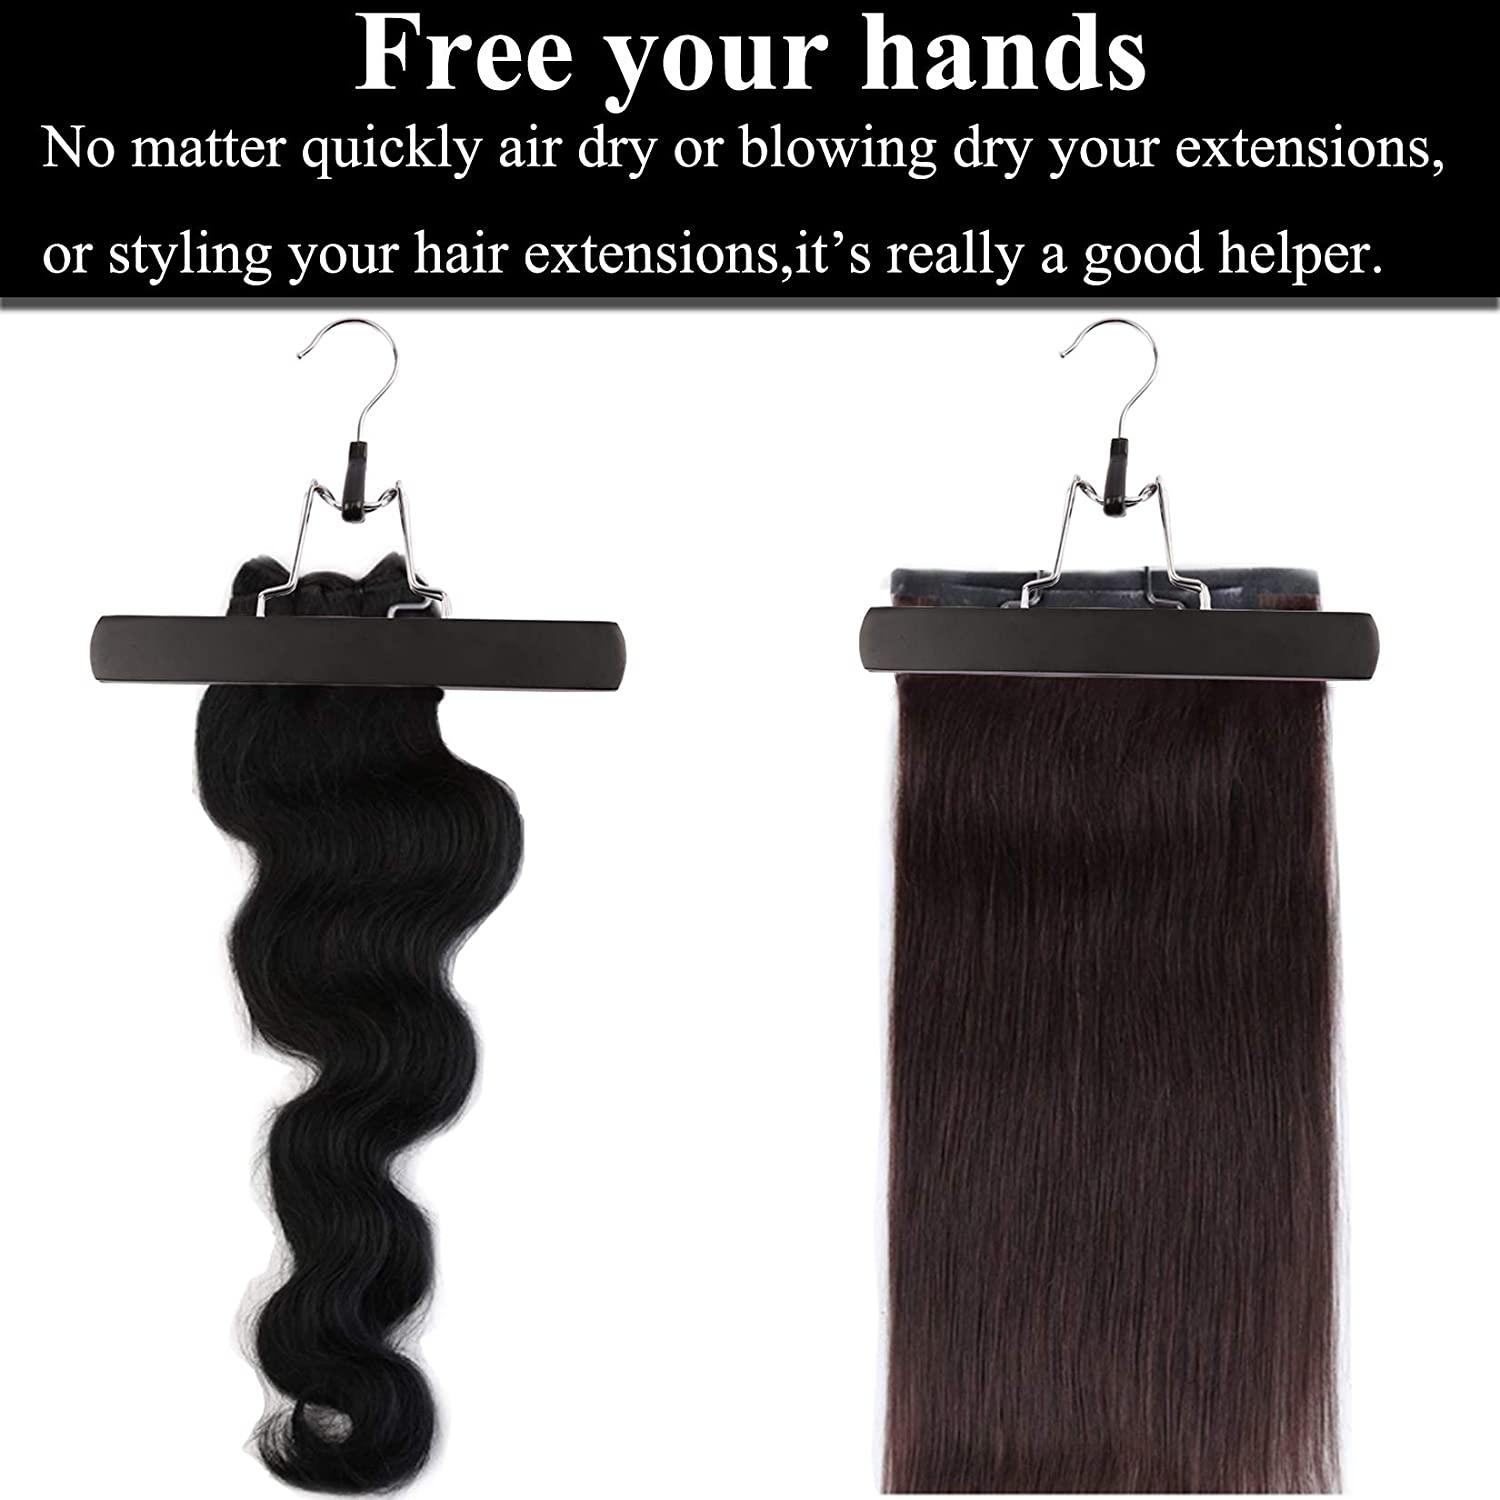 2Pcs Hair Extension Holder Extra Long Wig Storage Bag with Hanger